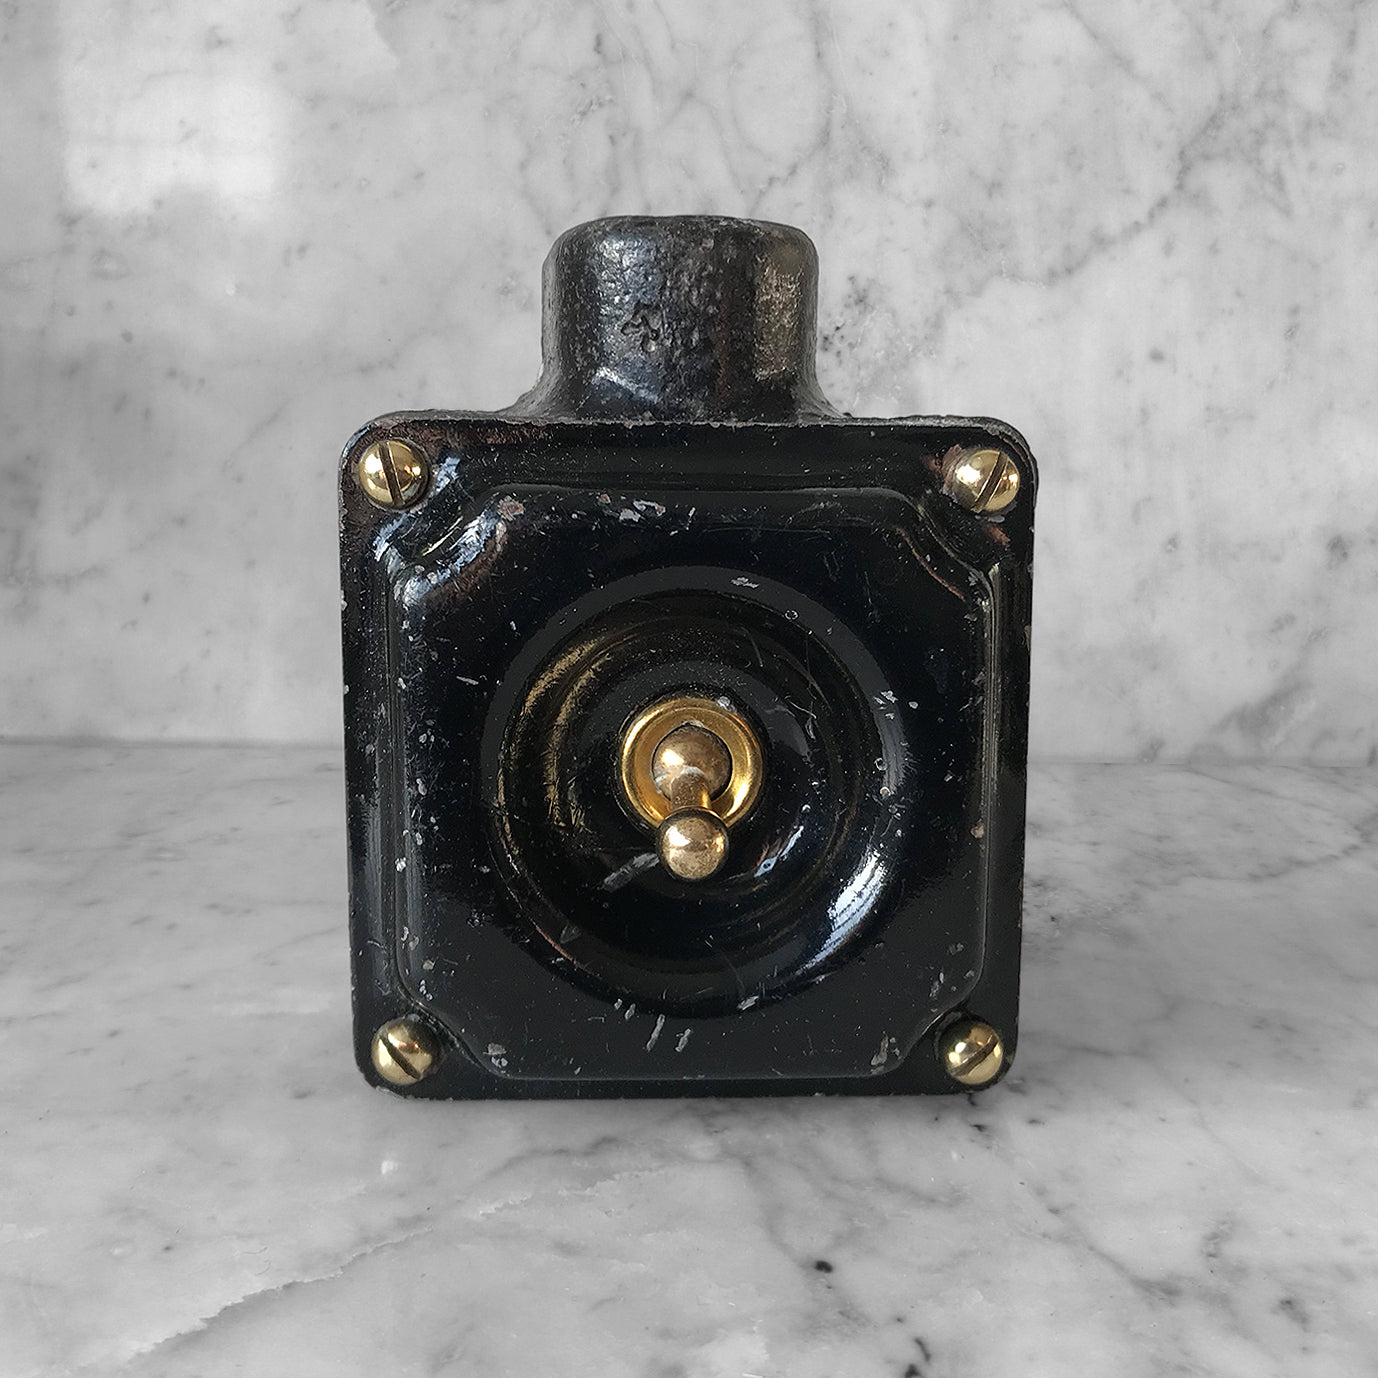 Metal Industrial Switch with a cast iron main body, pressed steel cover with brass toggle switch and brass cover screws with original finish. We have 3 of these switches in stock - SHOP NOW - www.intovintage.co.uk